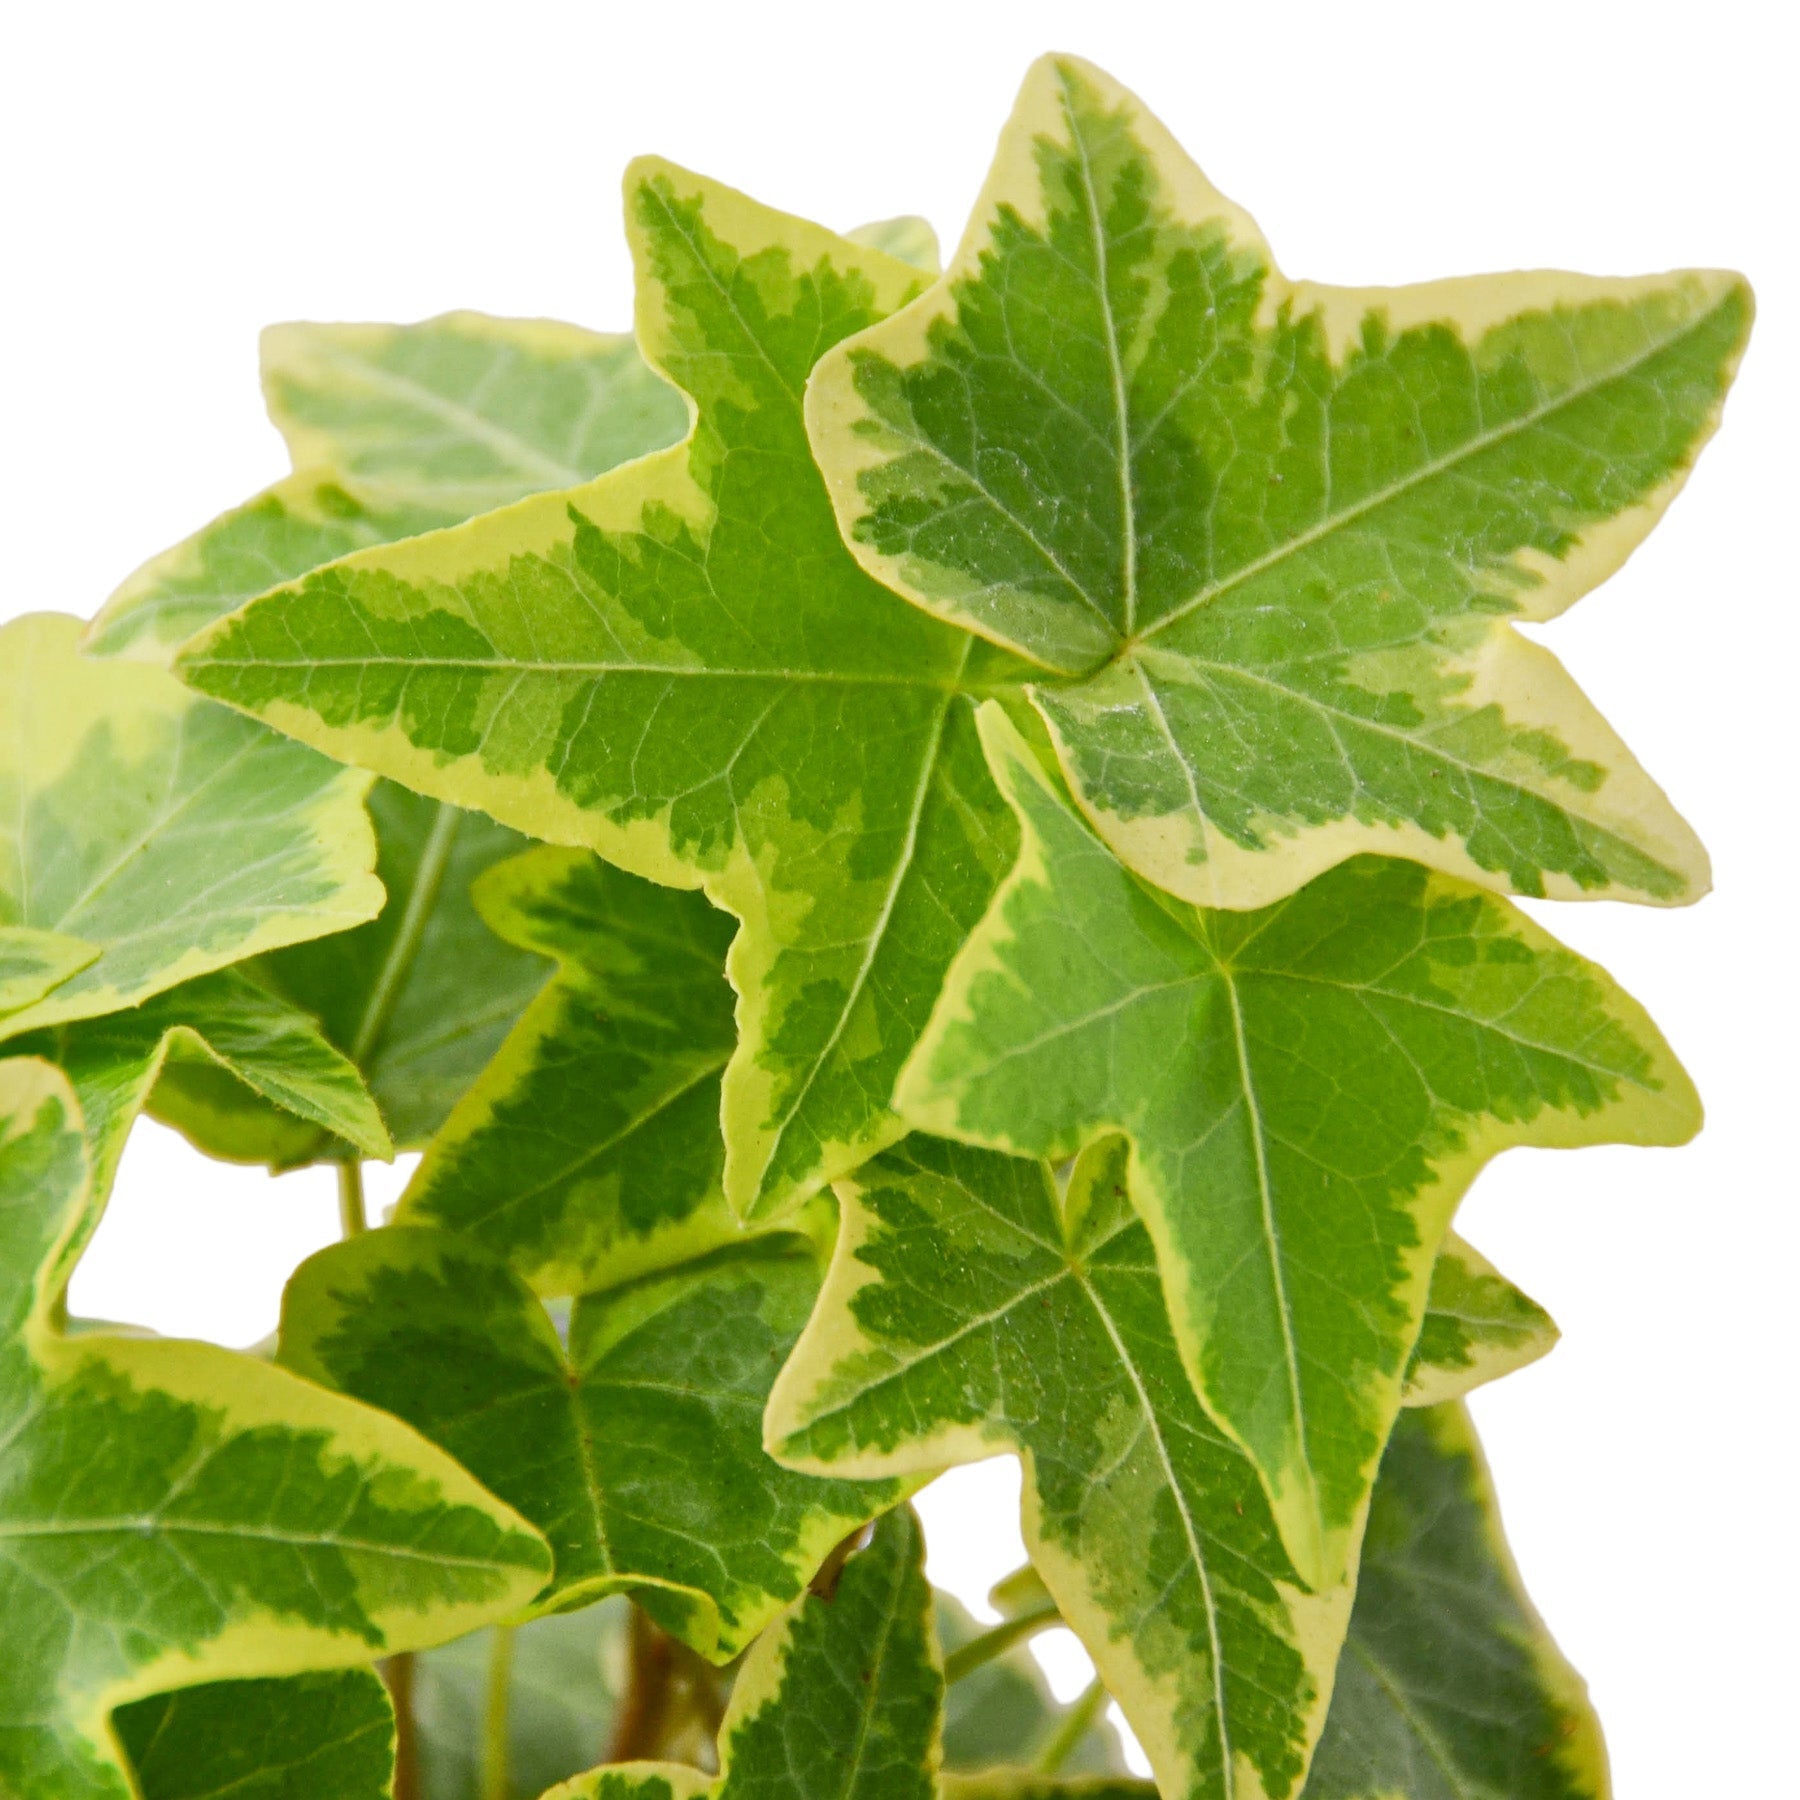 A lush ivy plant with vibrant green leaves against a clean white background.